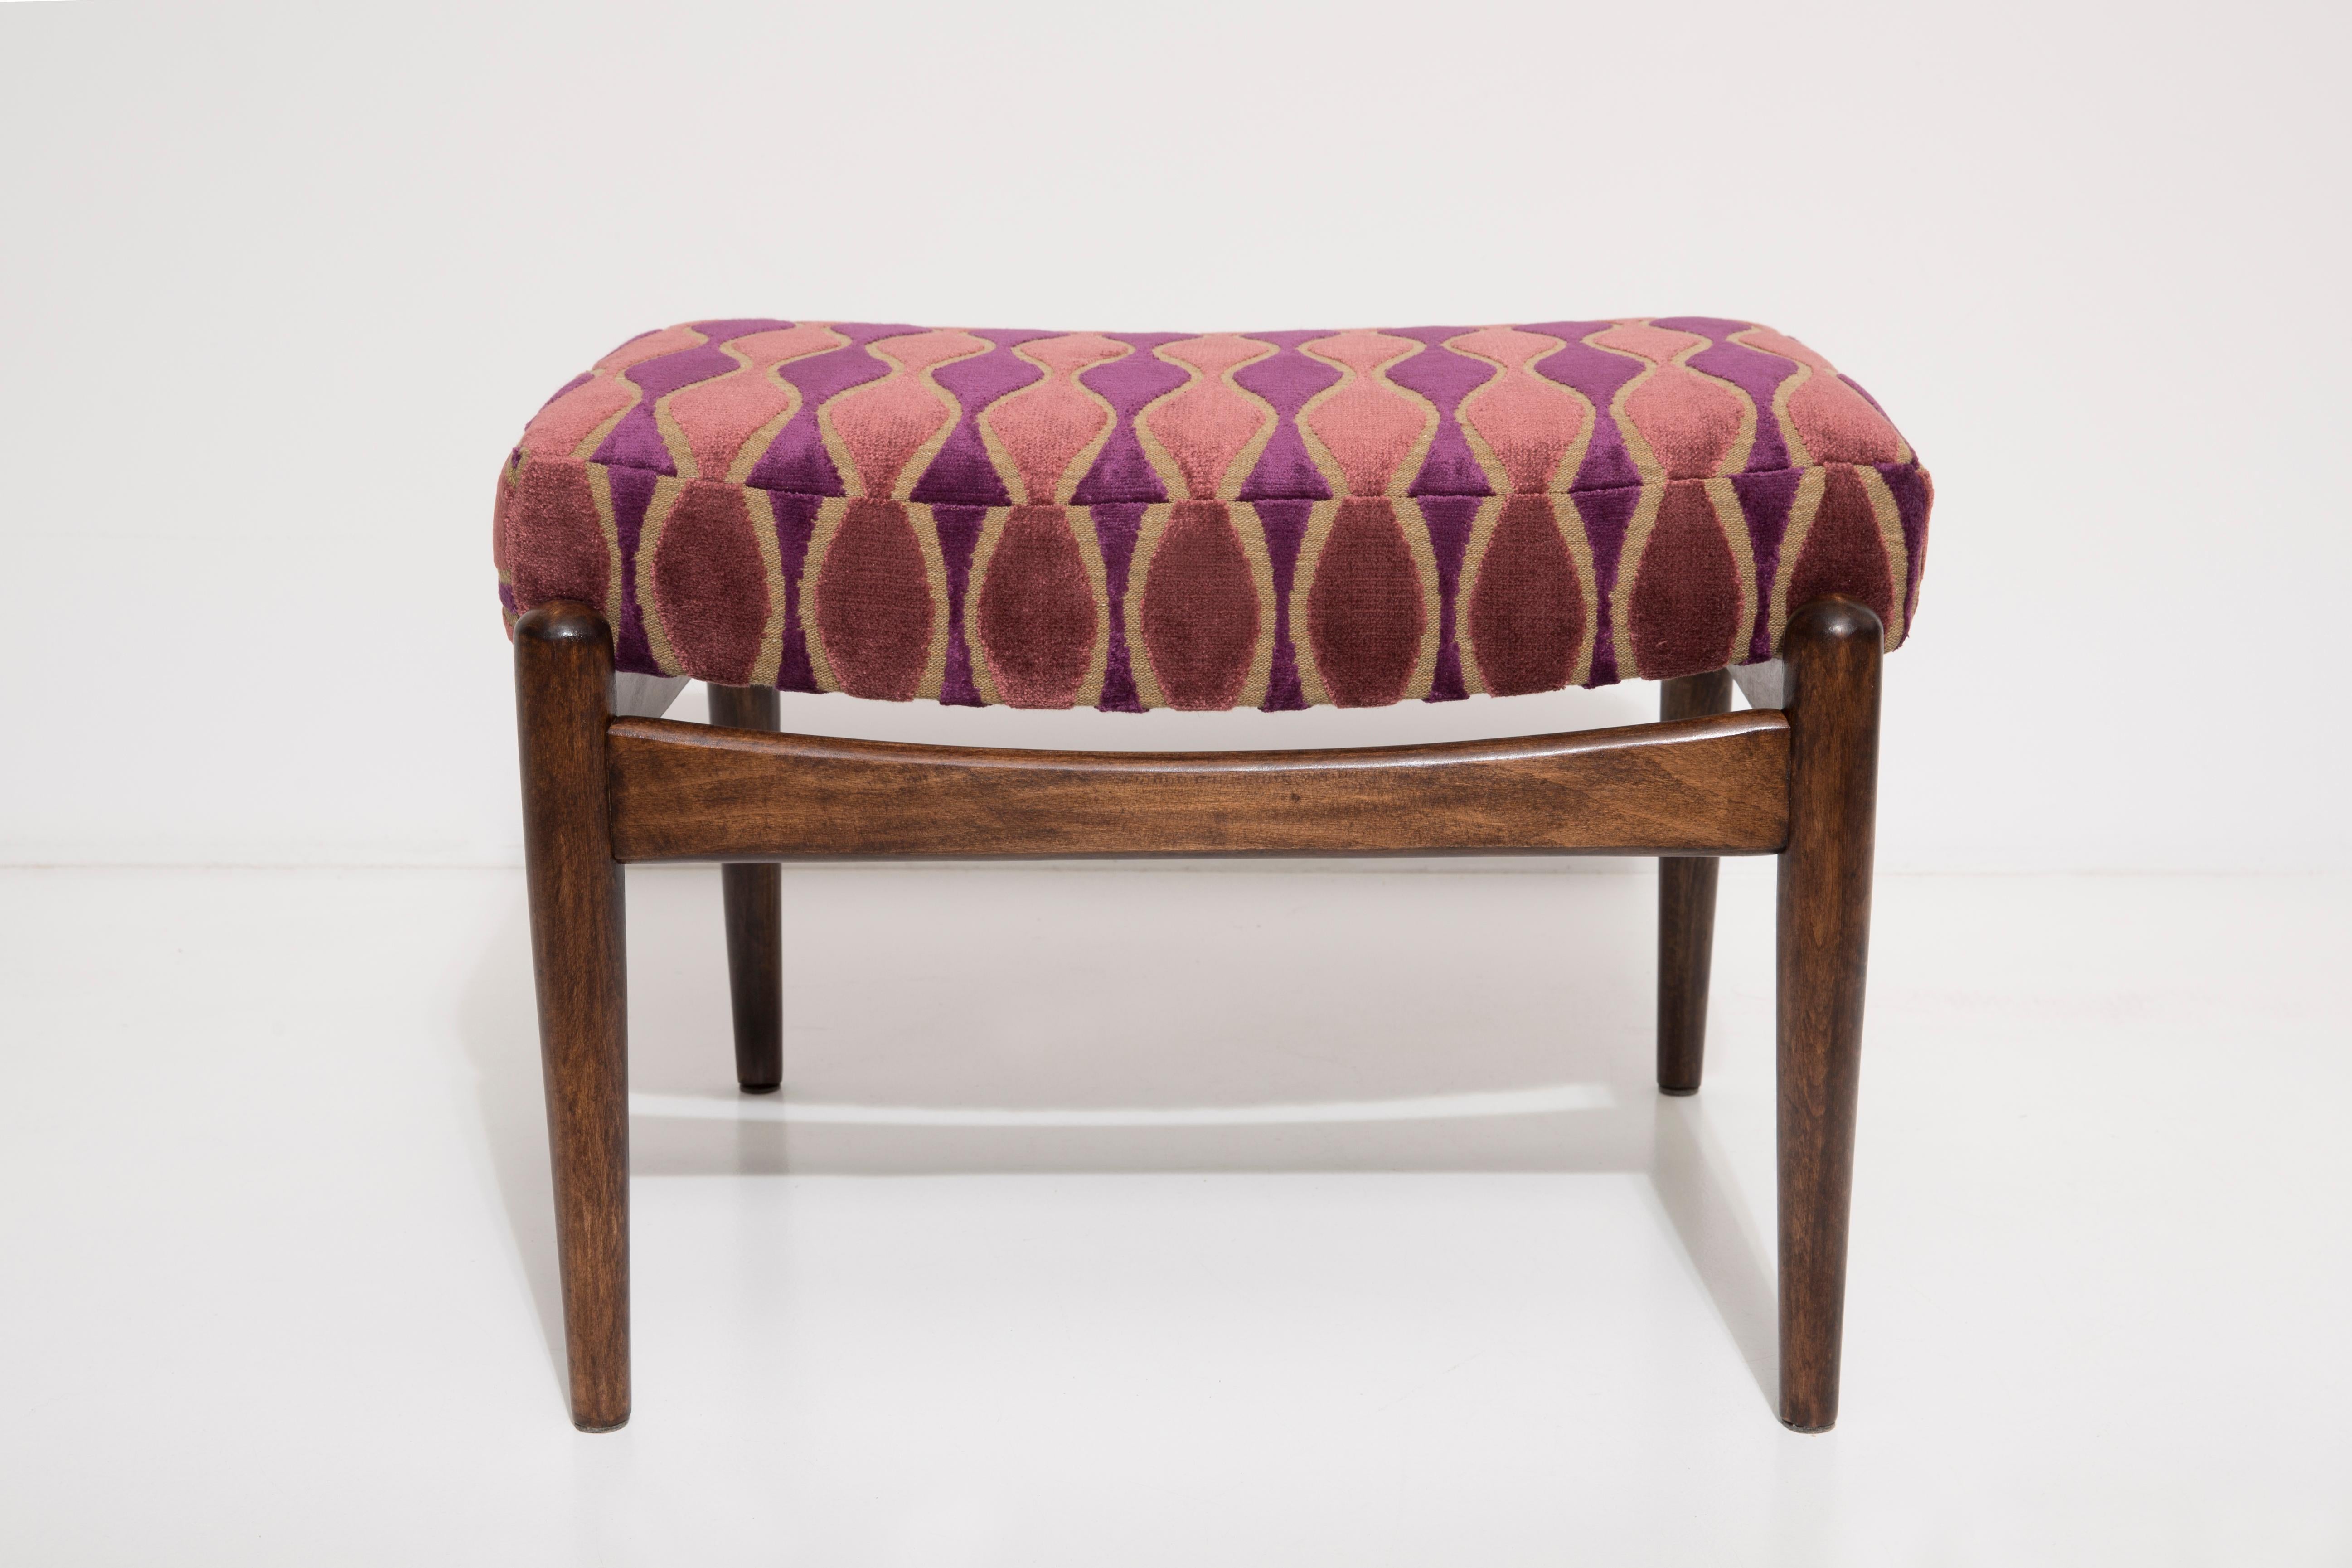 Stools from the turn of the 1960s. Beautiful pink pattern high quality italian velvet upholstery. The stools consists of an upholstered part, a seat and wooden legs narrowing downwards, characteristic of the 1960s style. We can prepare this set also